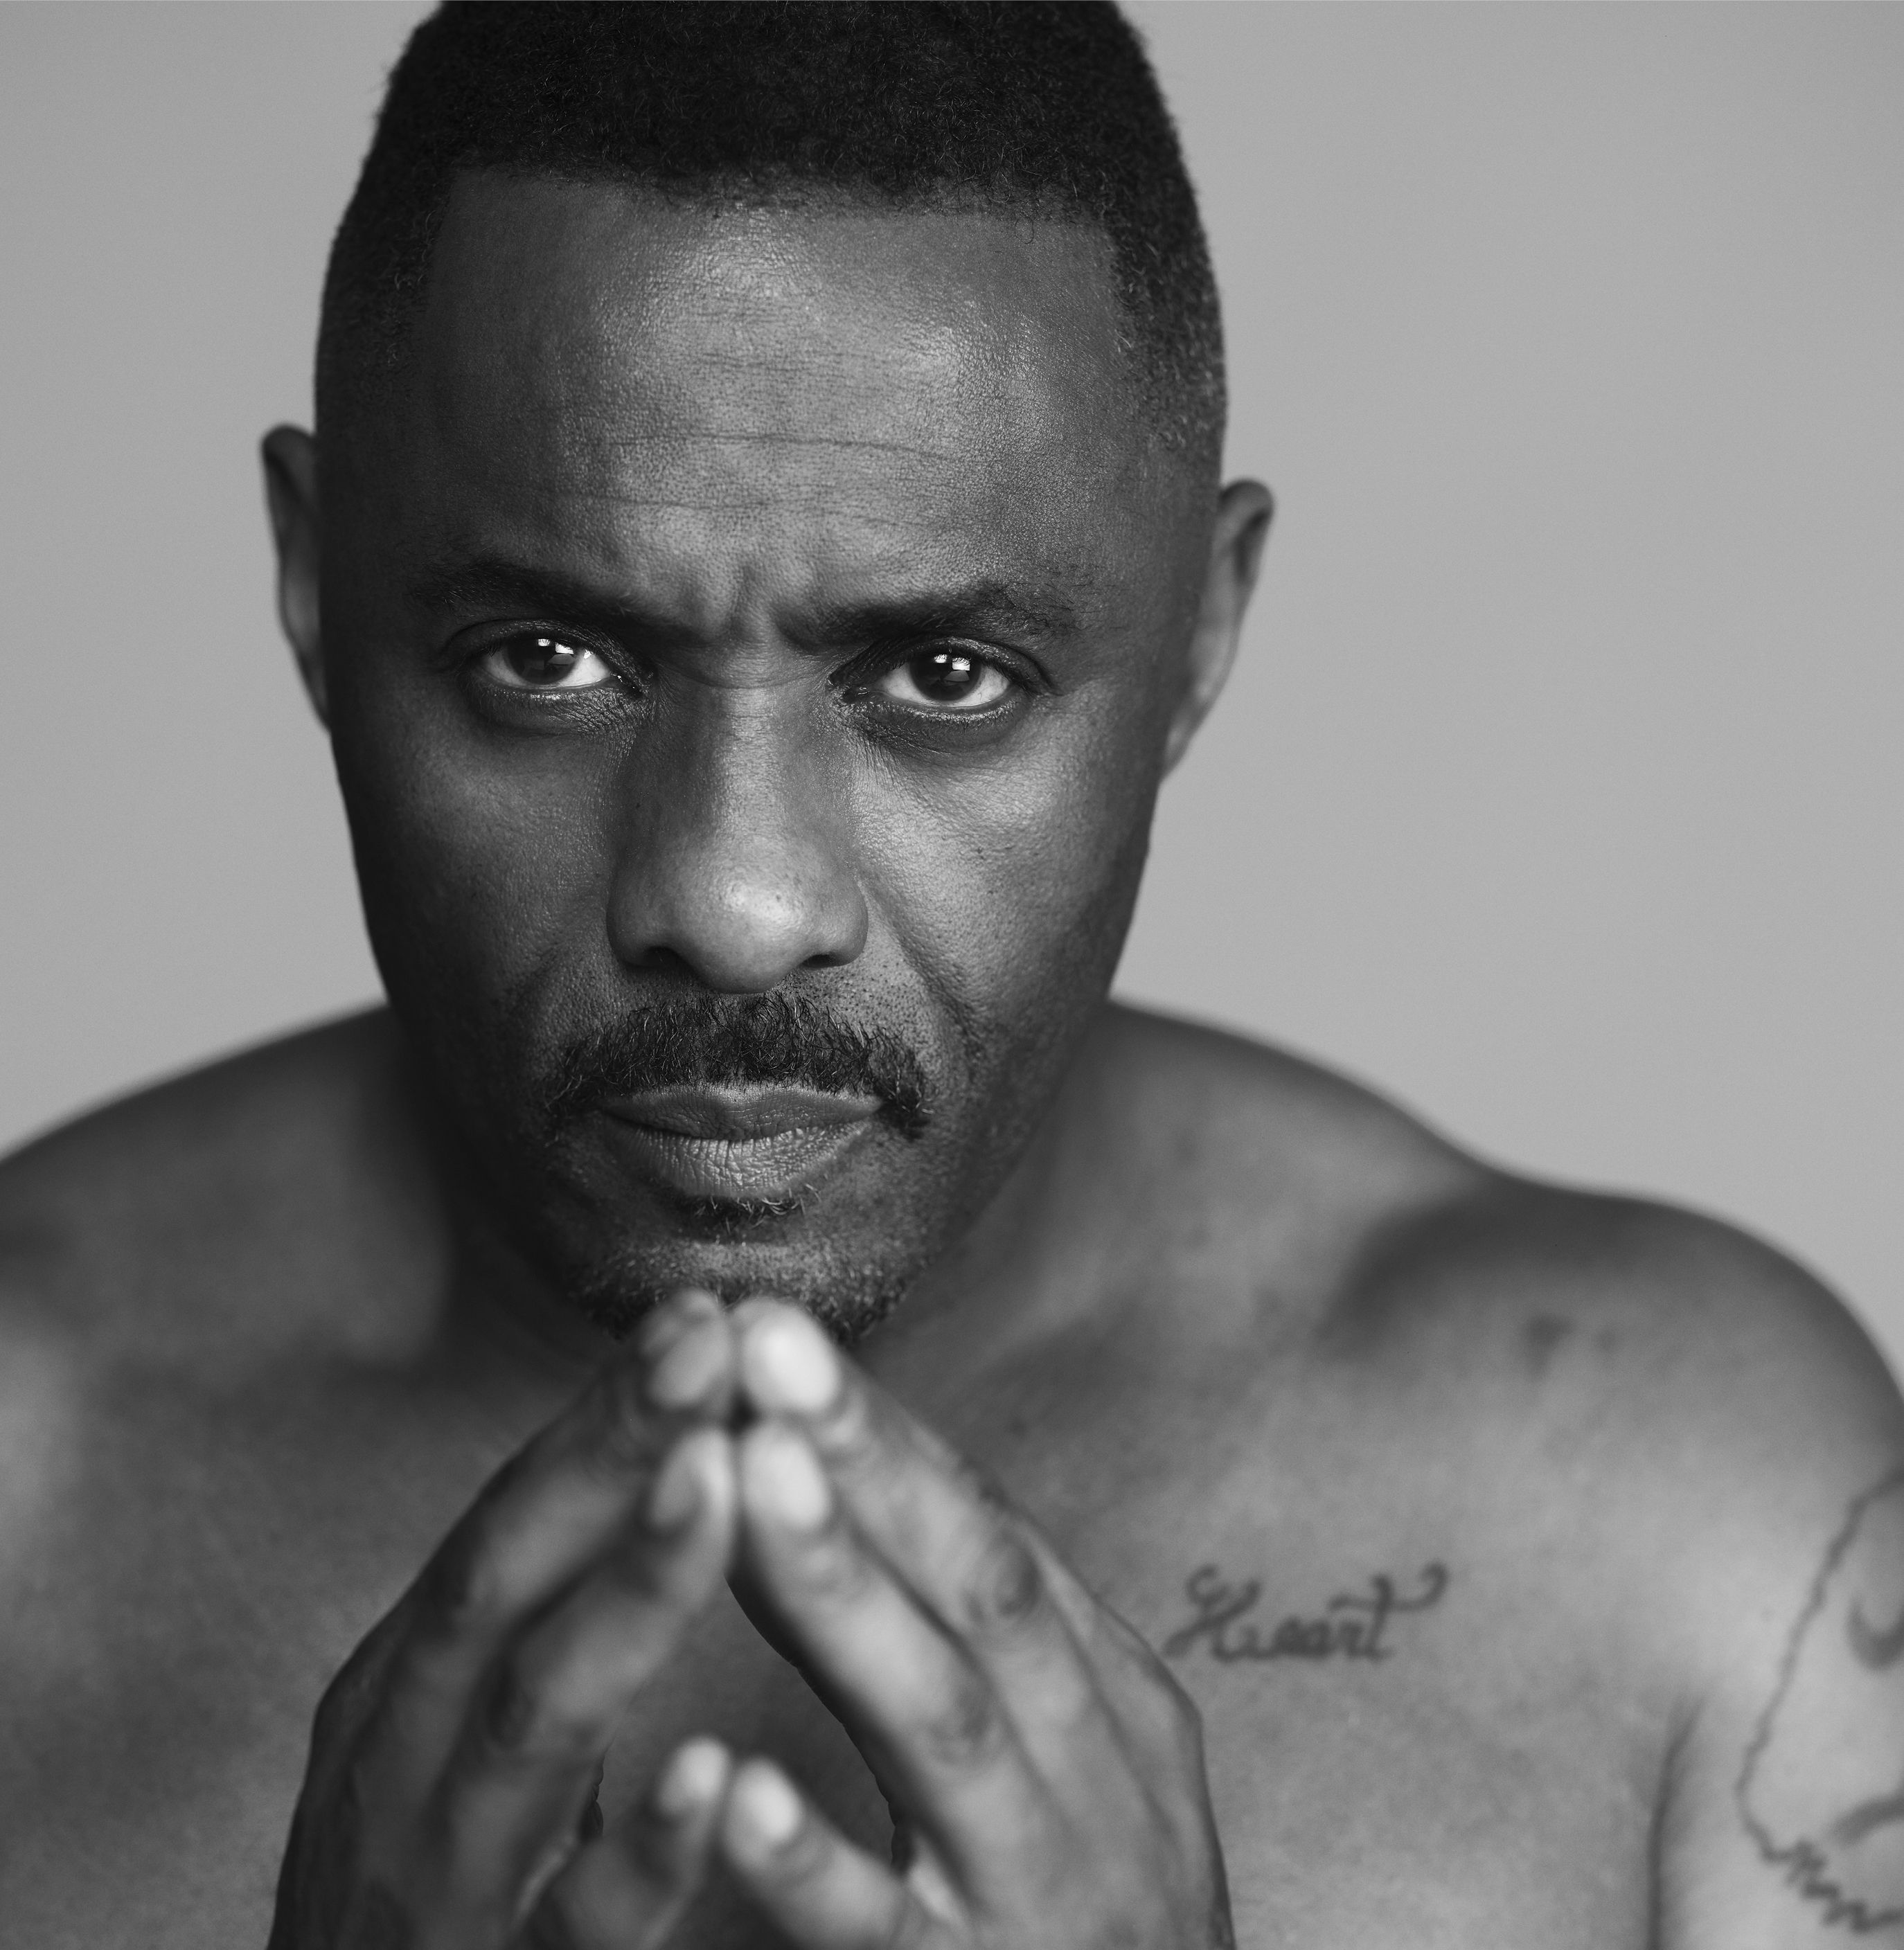 Xxx Hd Bus Rep Fucking - Idris Elba on the Future of Luther & the Private Life of a Public Figure